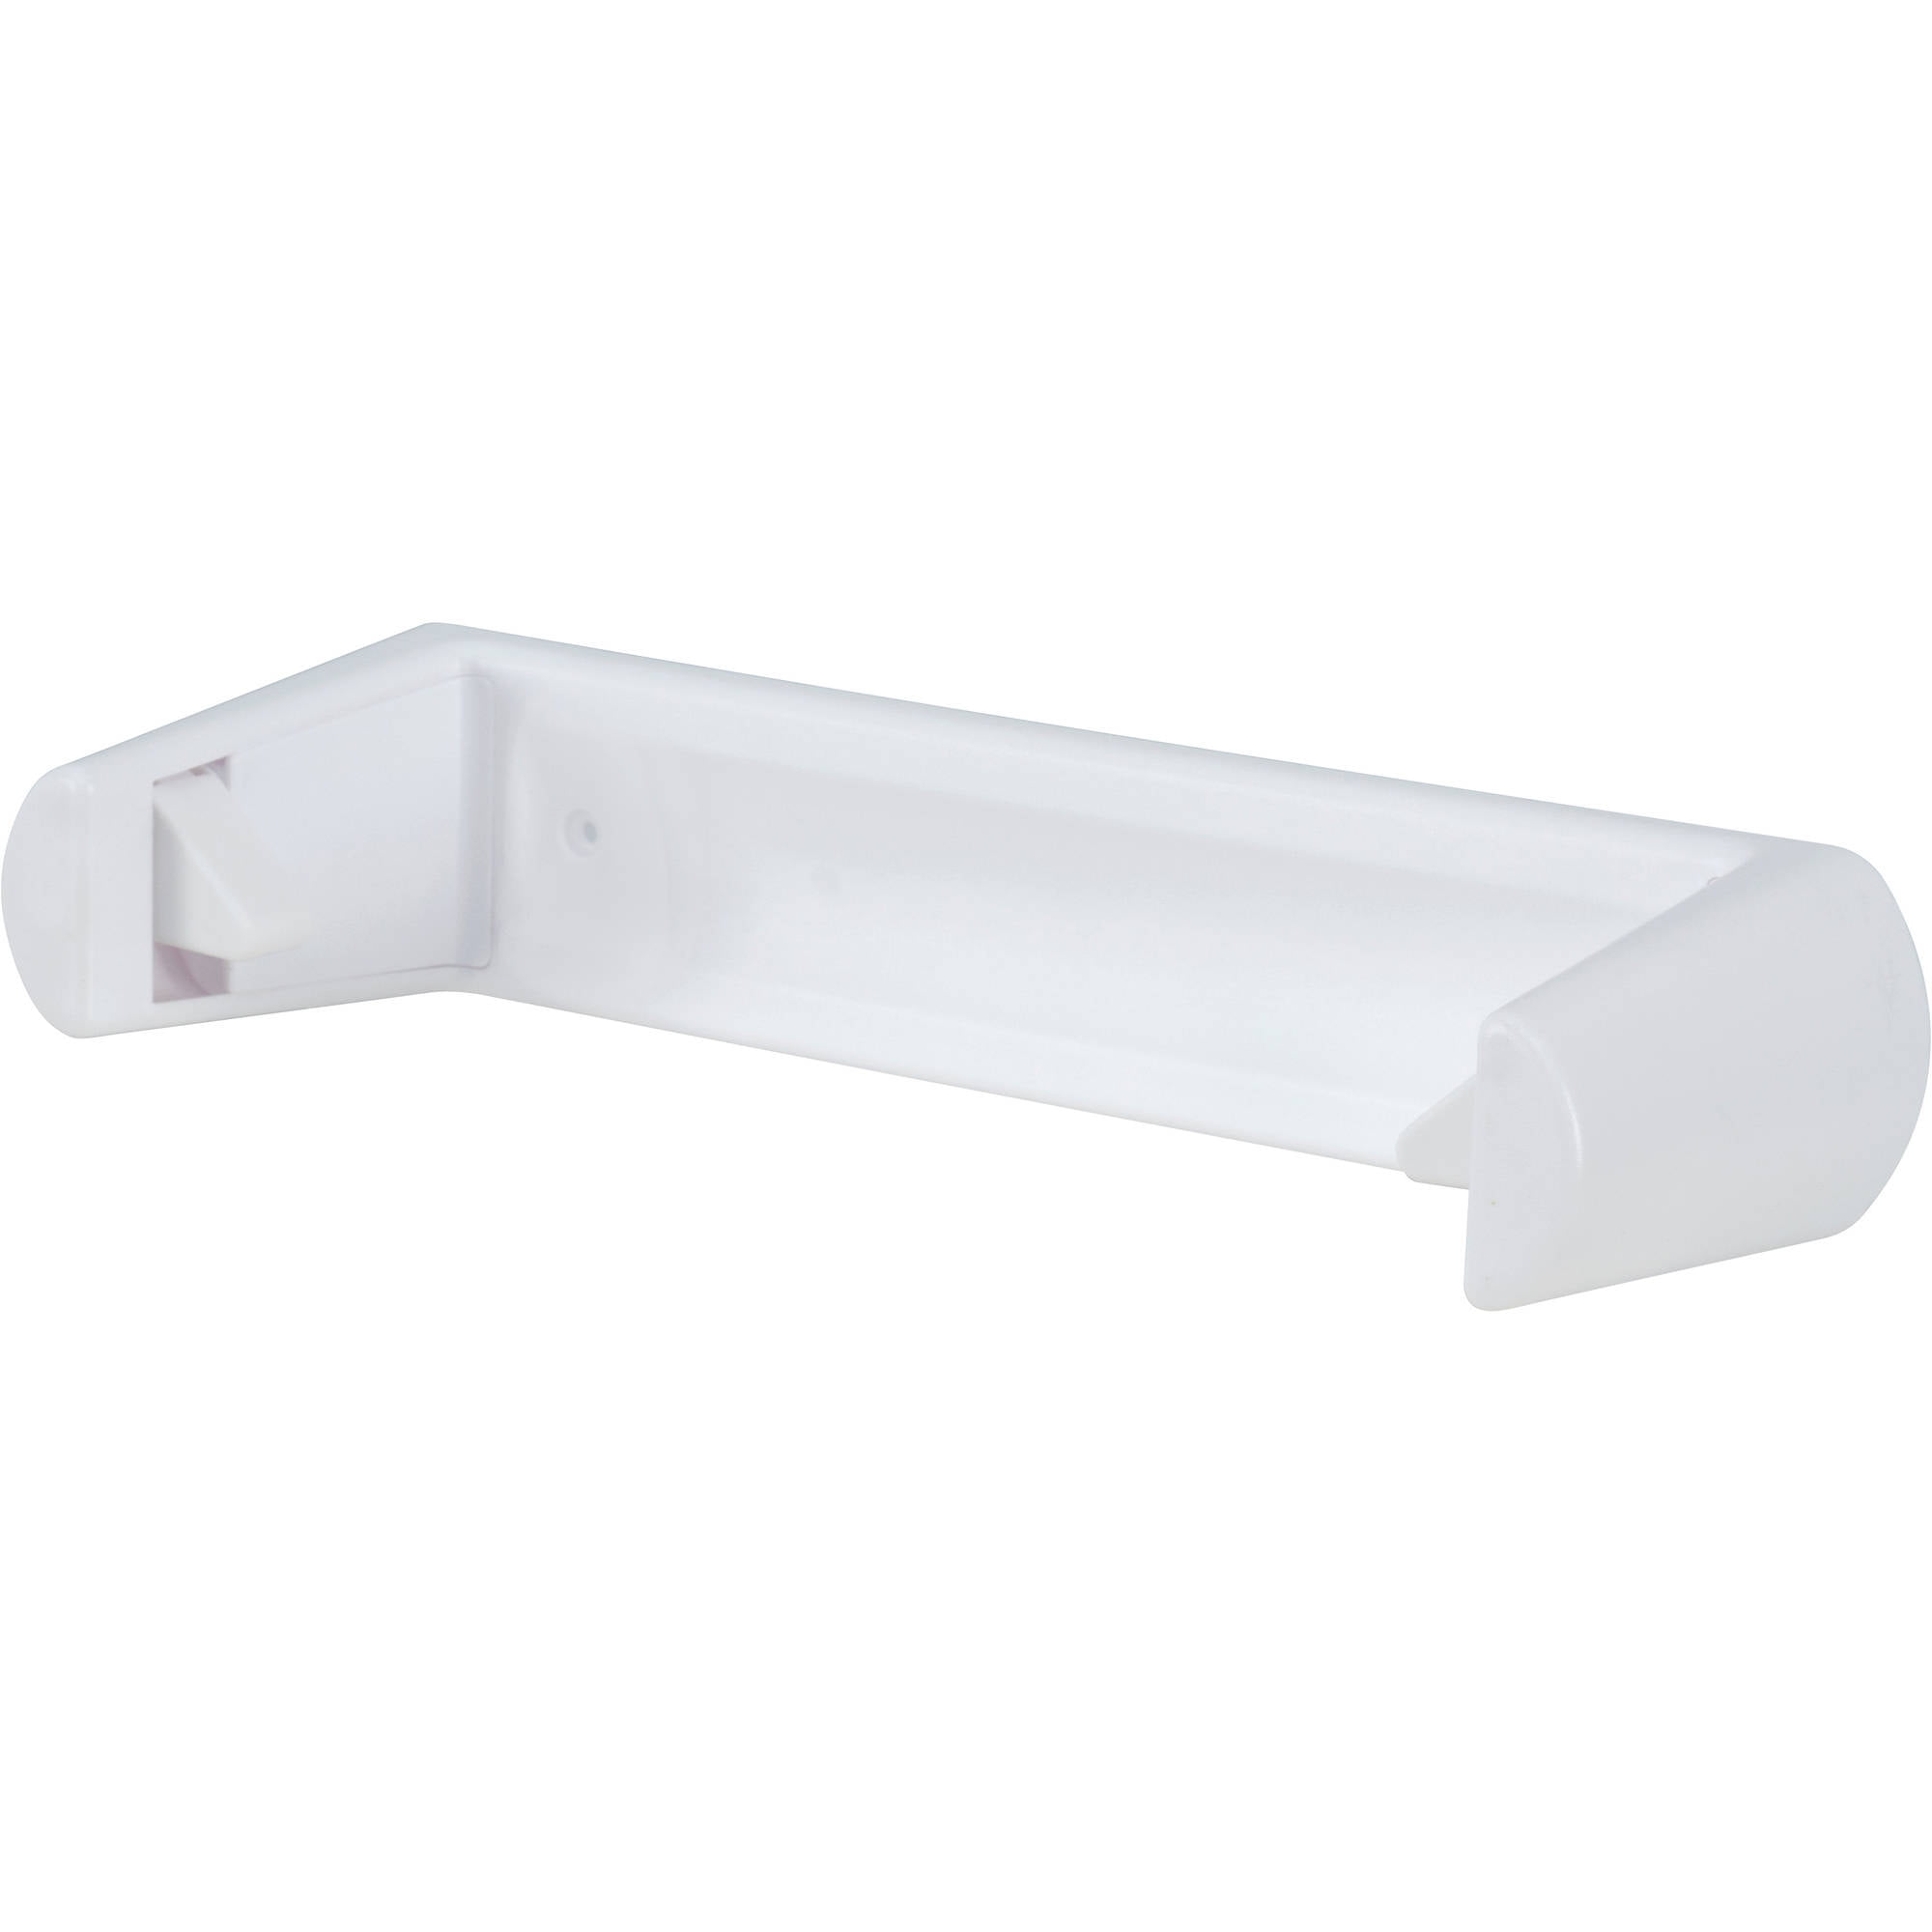 Mainstays Plastic Wall-Mounted Paper Towel Holder, White